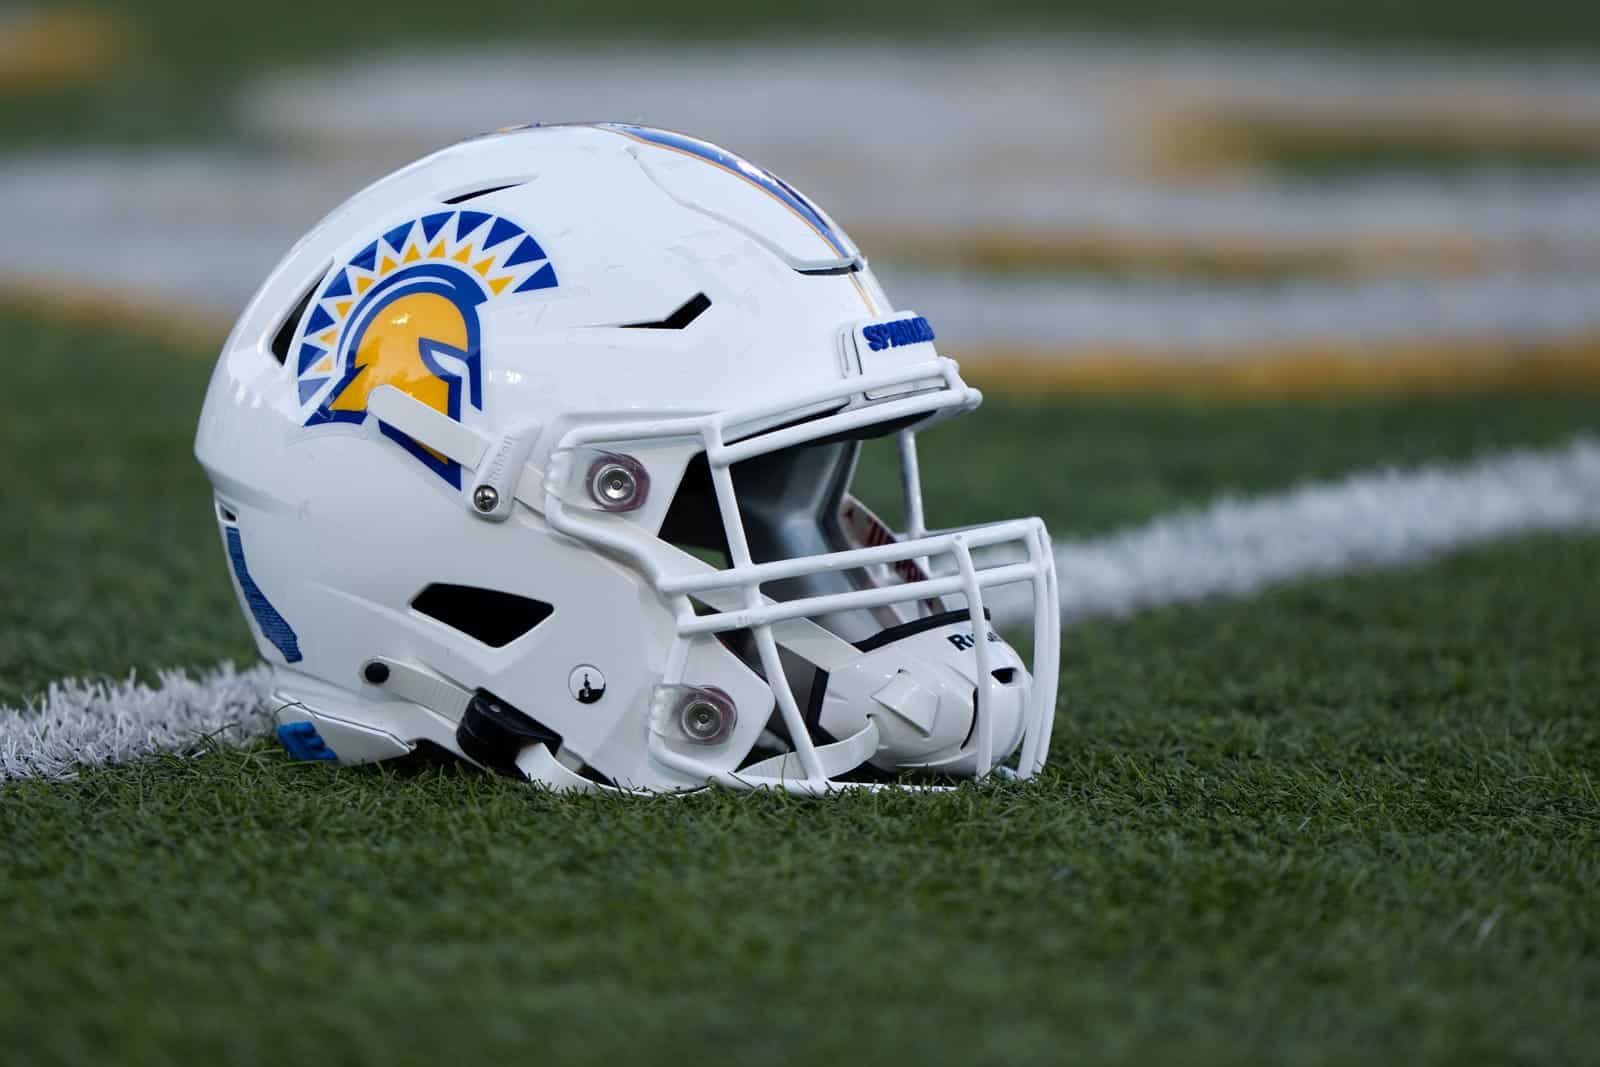 San Jose State-New Mexico State football game on Saturday postponed